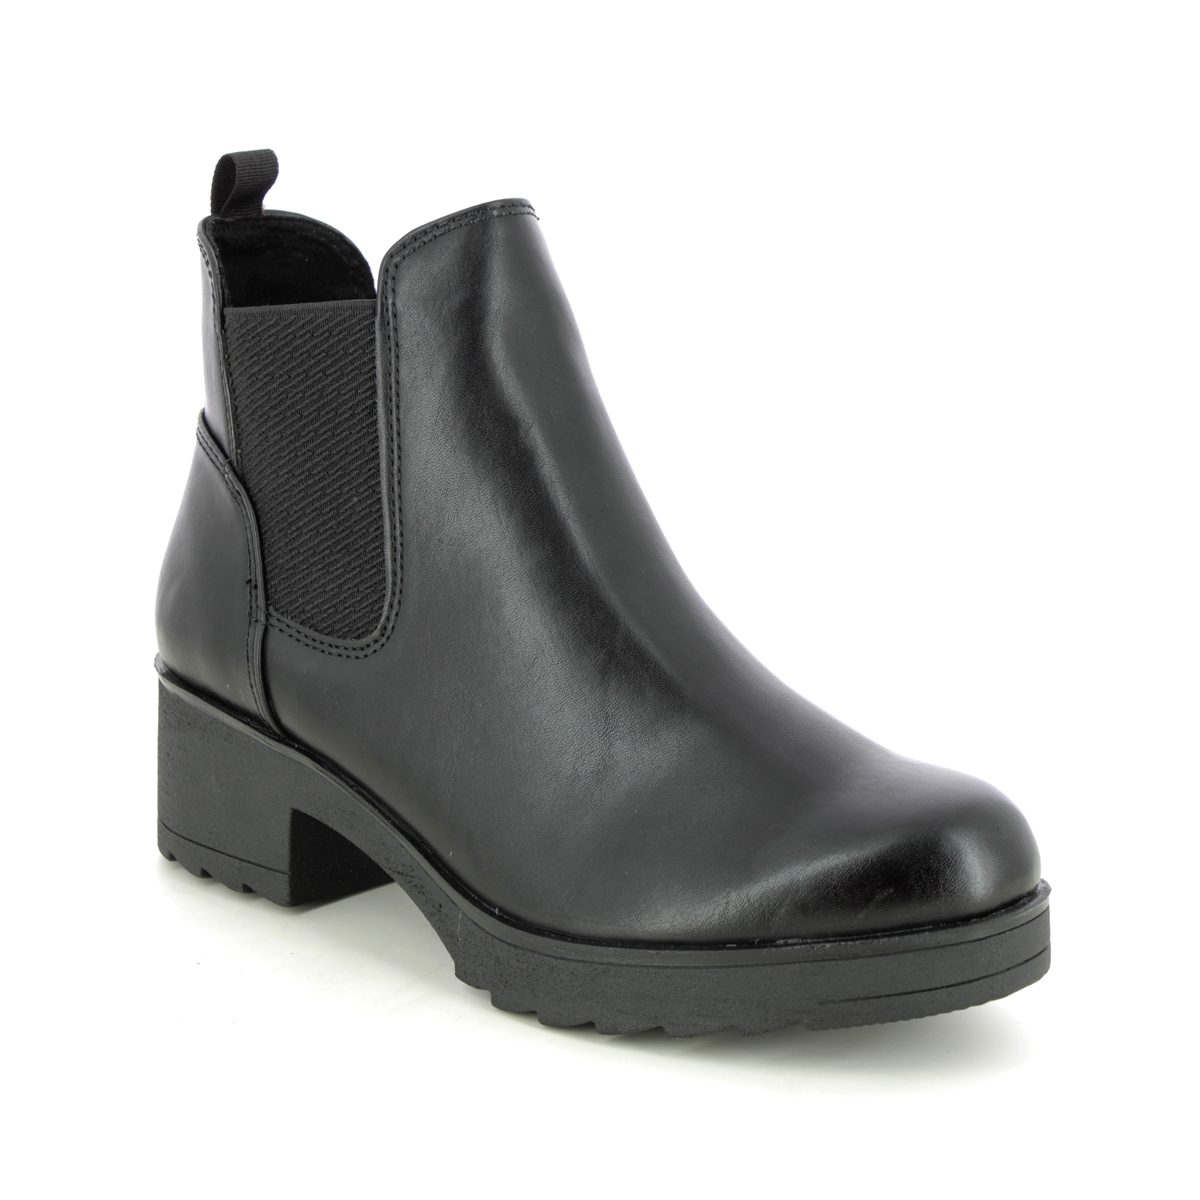 Marco Tozzi Dono Chelsea Black Womens Chelsea Boots 25806-29-001 In Size 40 In Plain Black